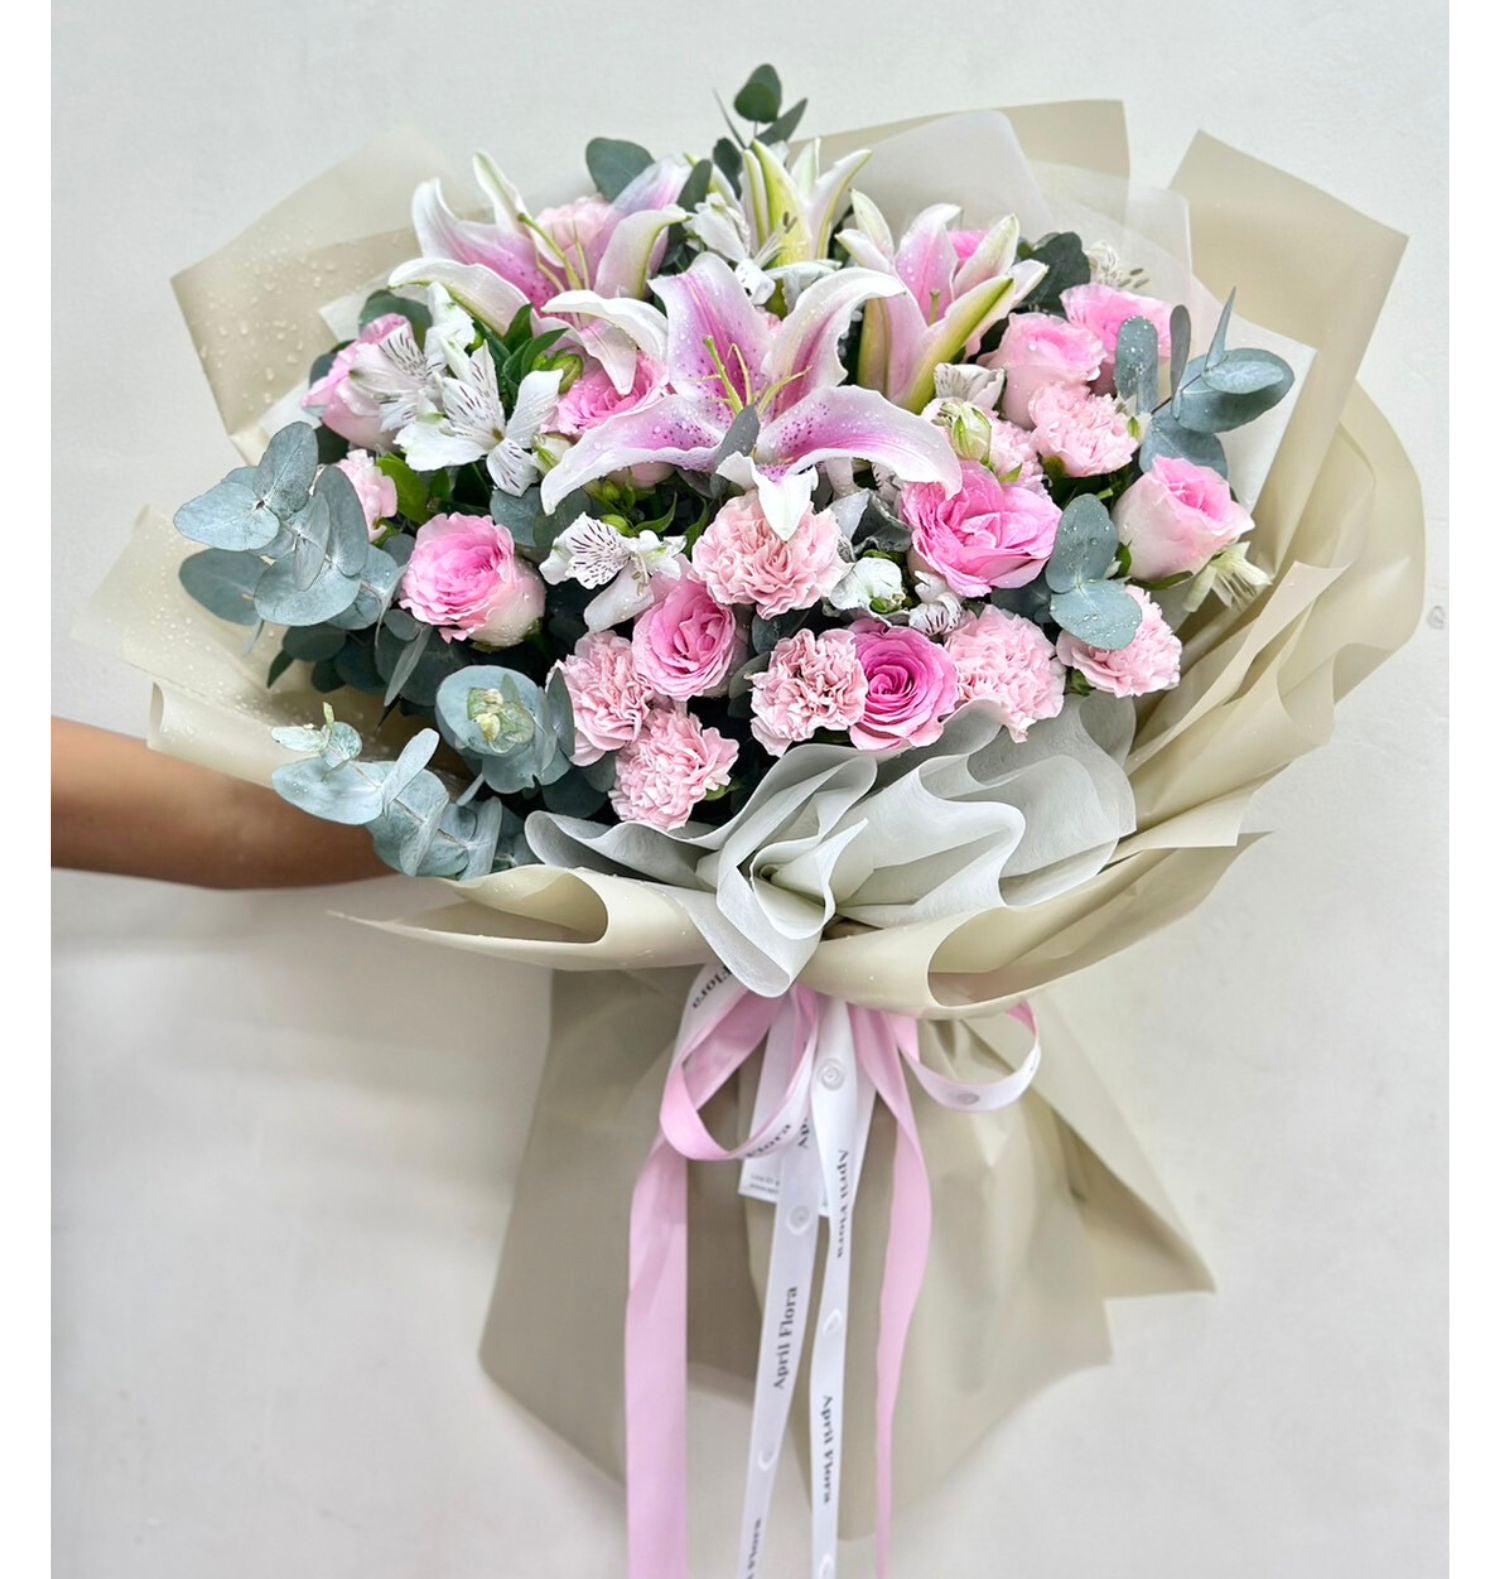 "You Are My Favorite" Bouquet